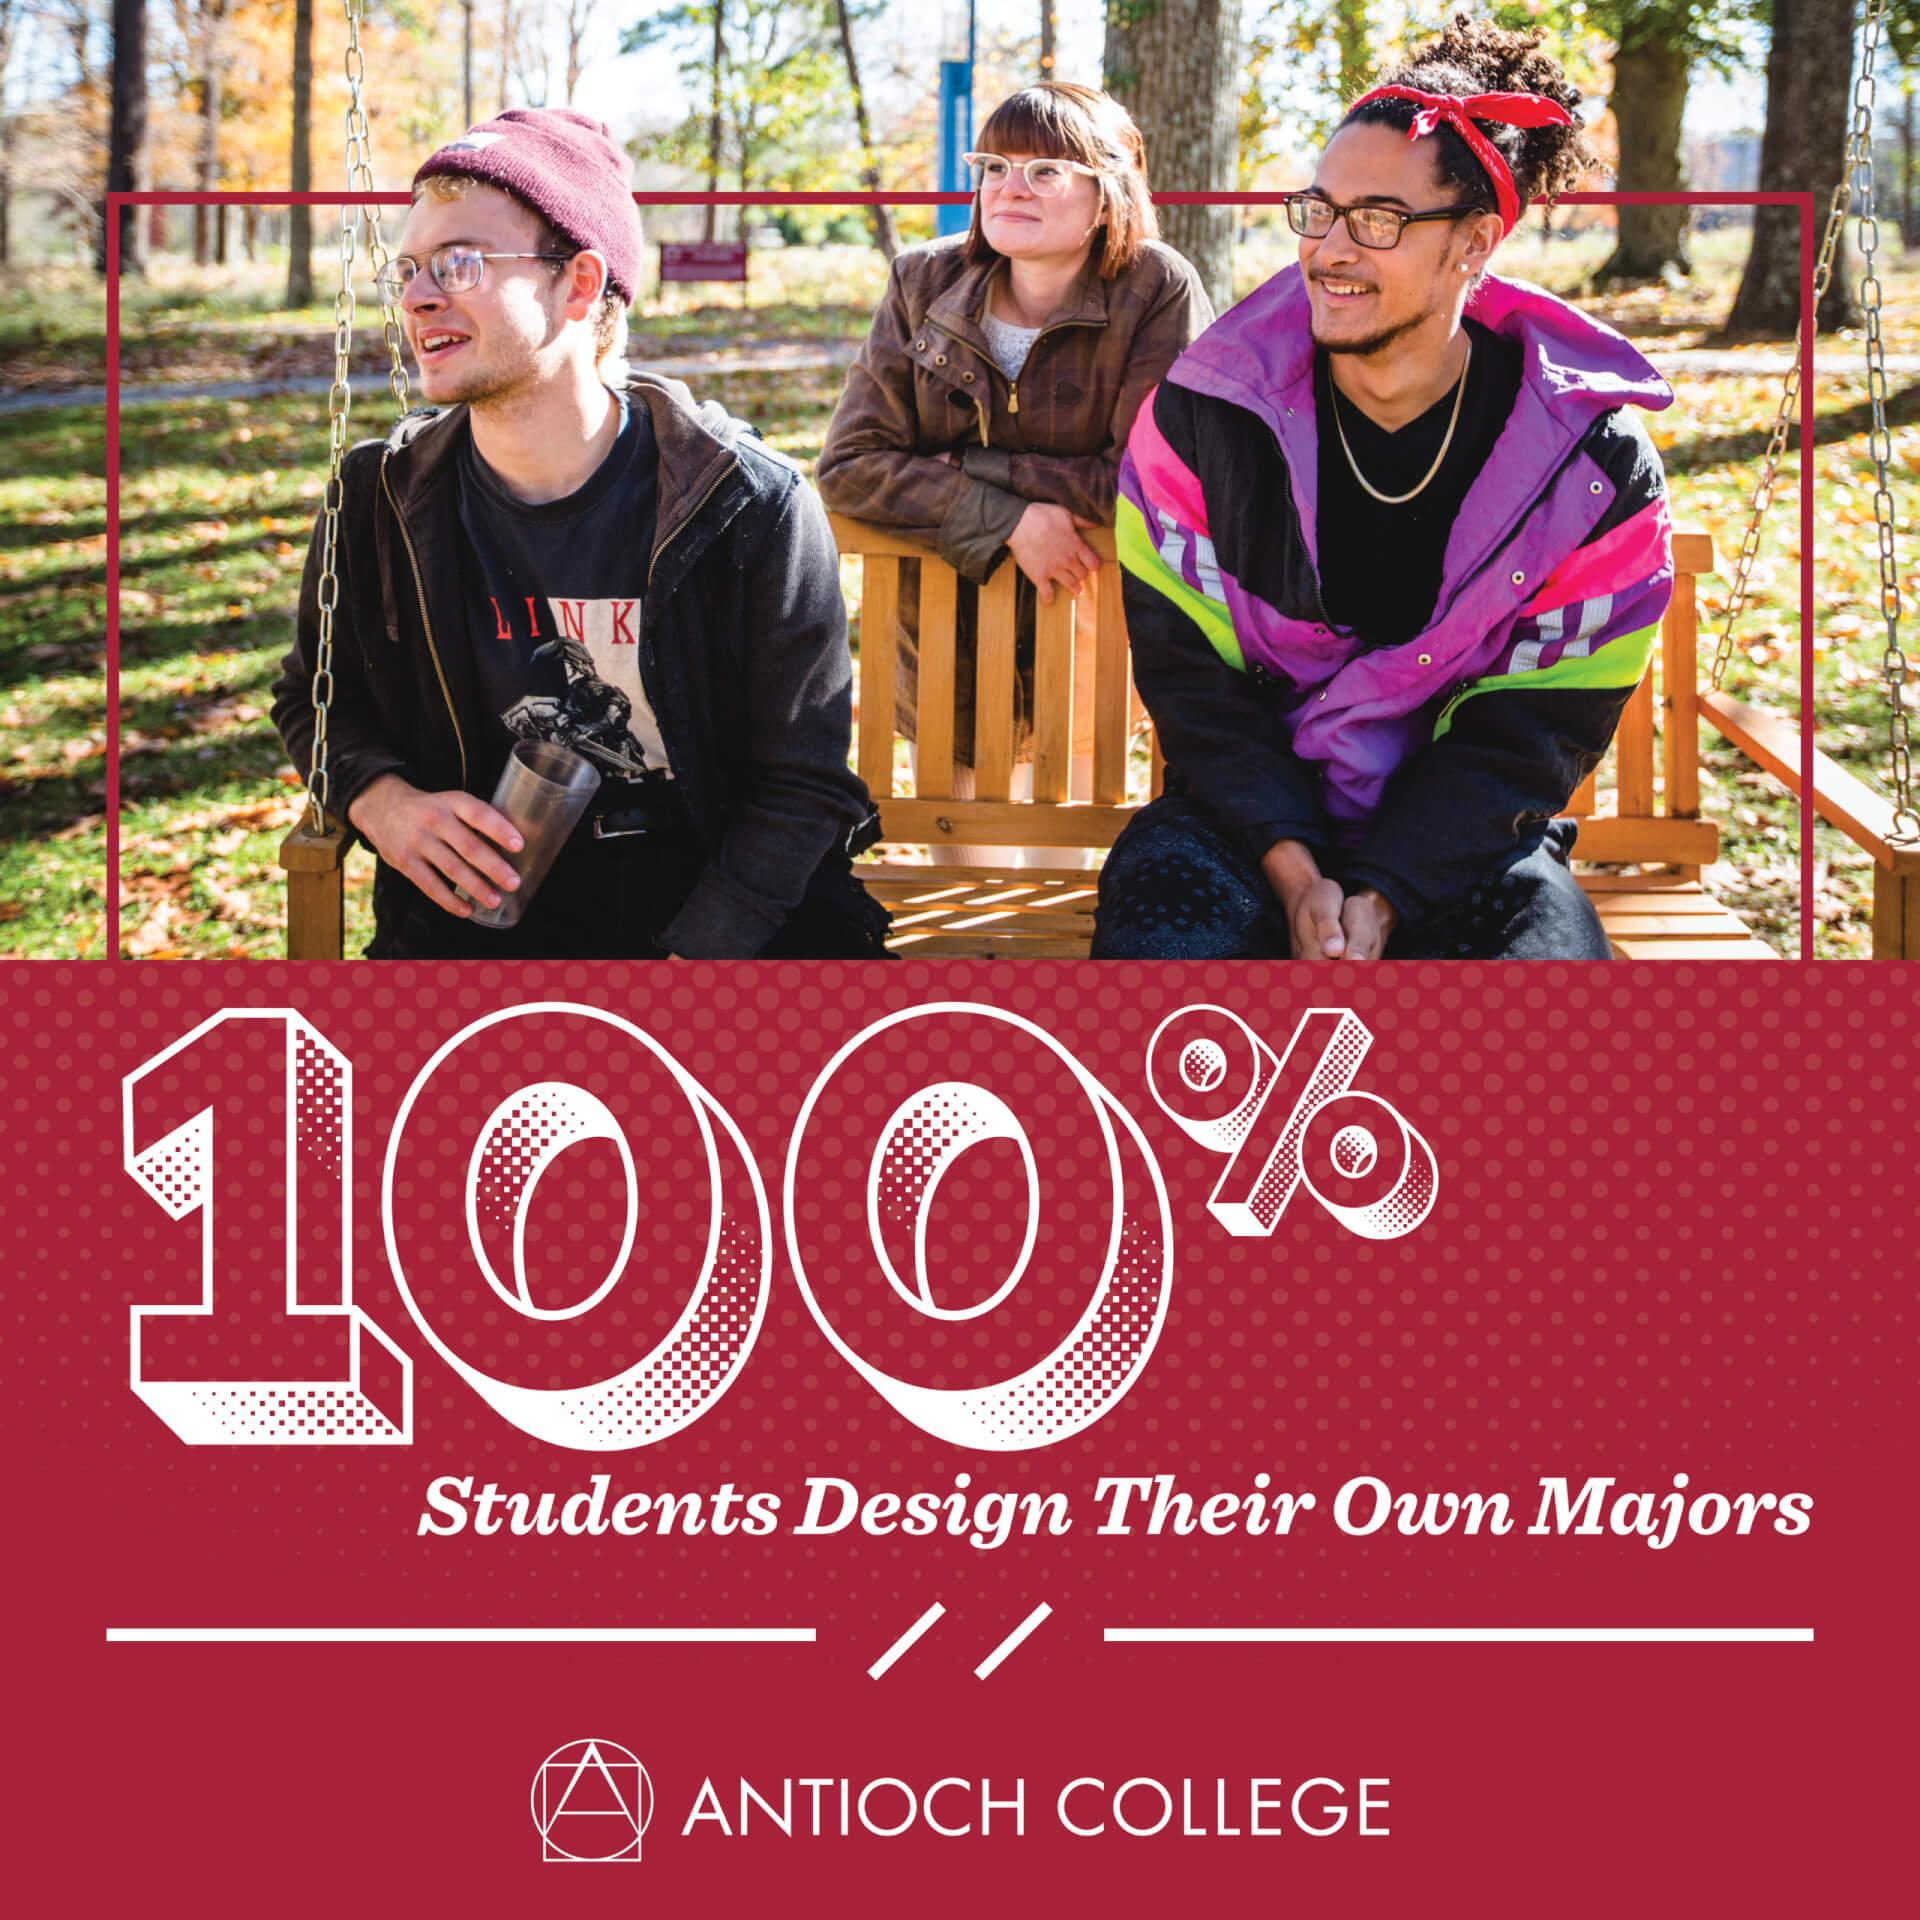 100% Students Design Their Own Majors